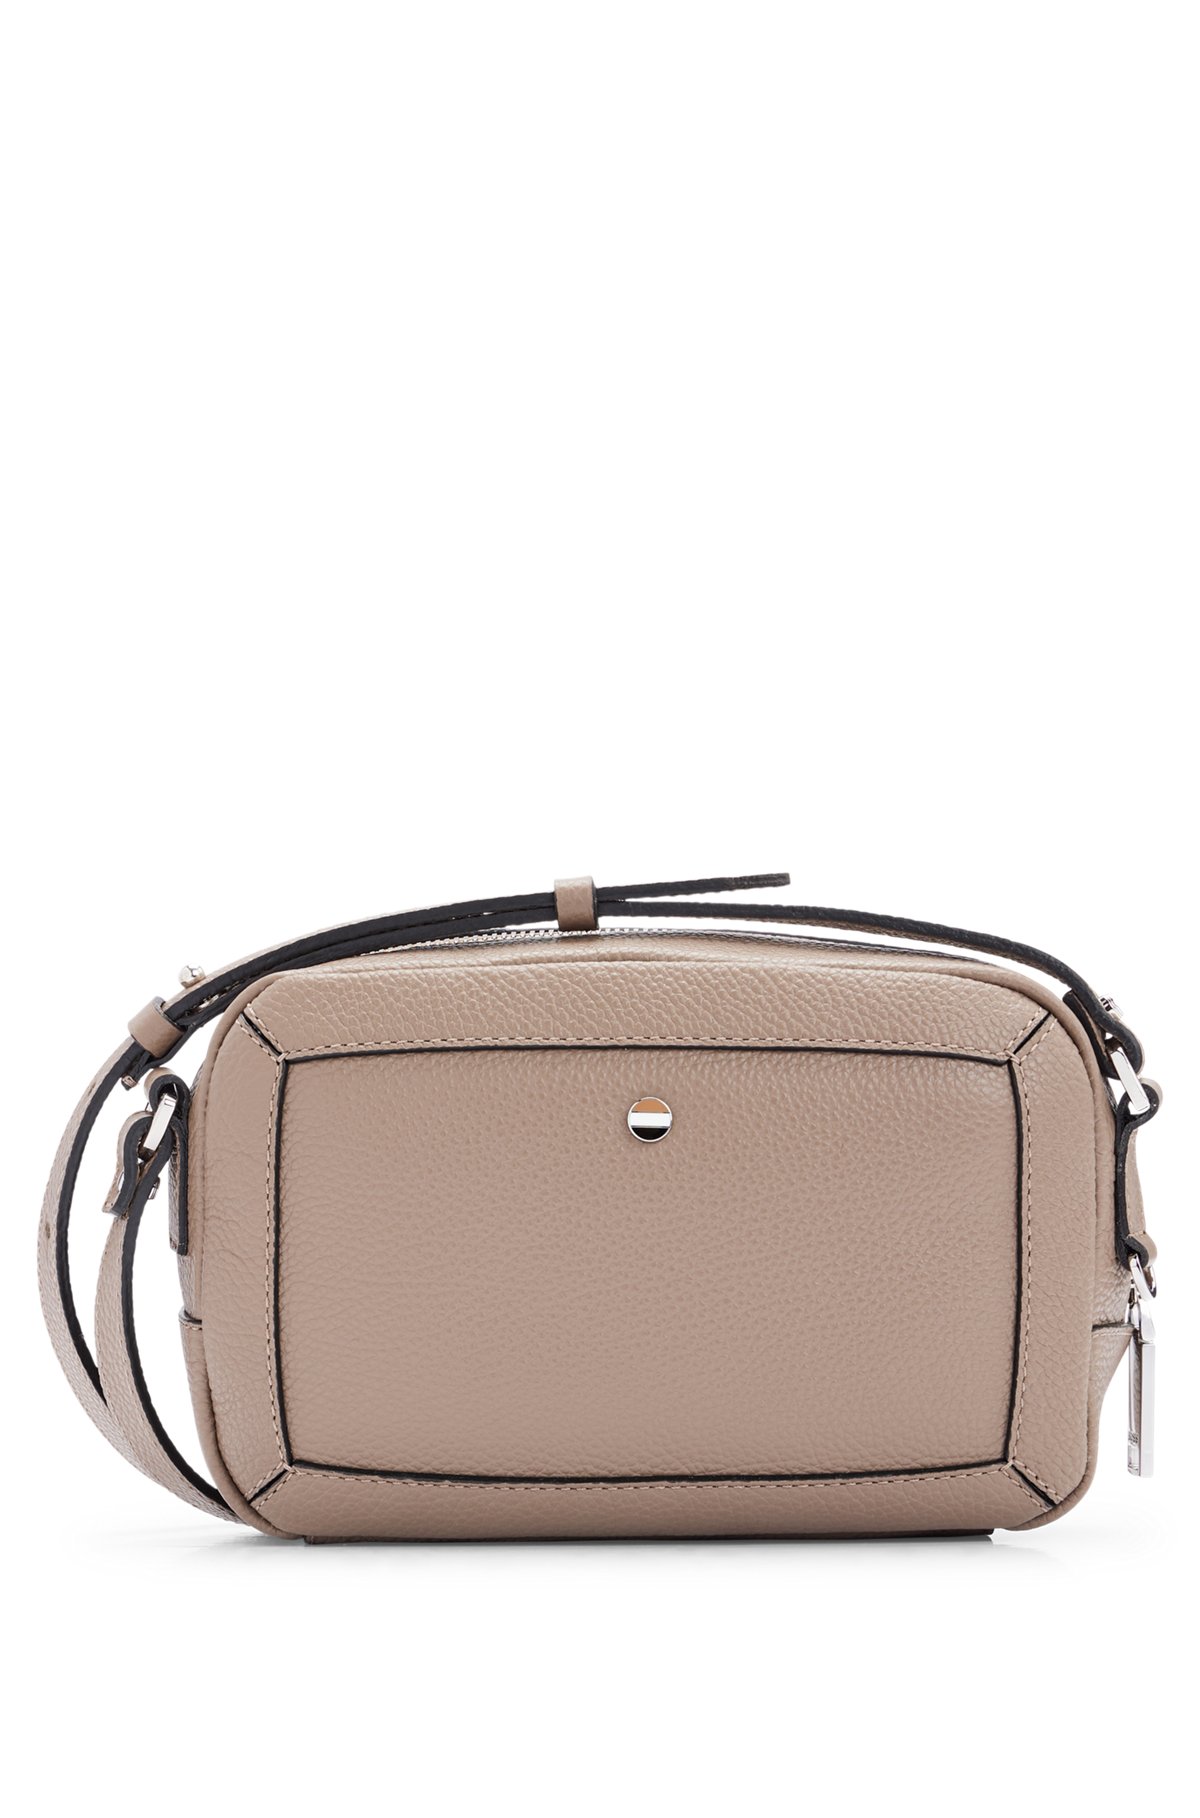 Grained-leather crossbody bag with branded hardware, Beige